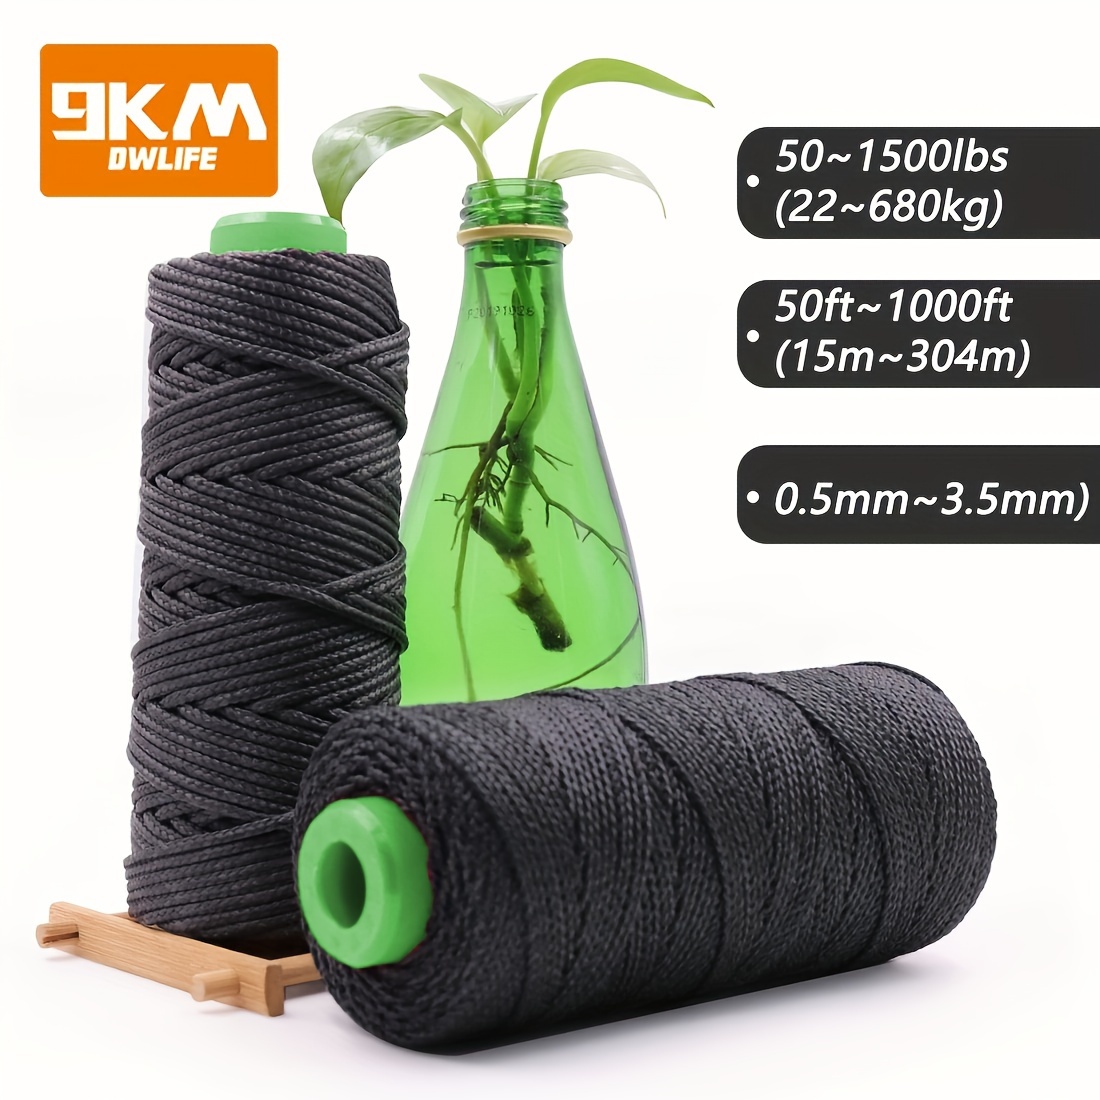 9KM DWLIFE 100% Kevlar Braided Line,Multipurpose Braided Cord Utility Rope Kite line/Camping Cordage/Fishing Tackle Assist/Model Rocket Heat And Cut